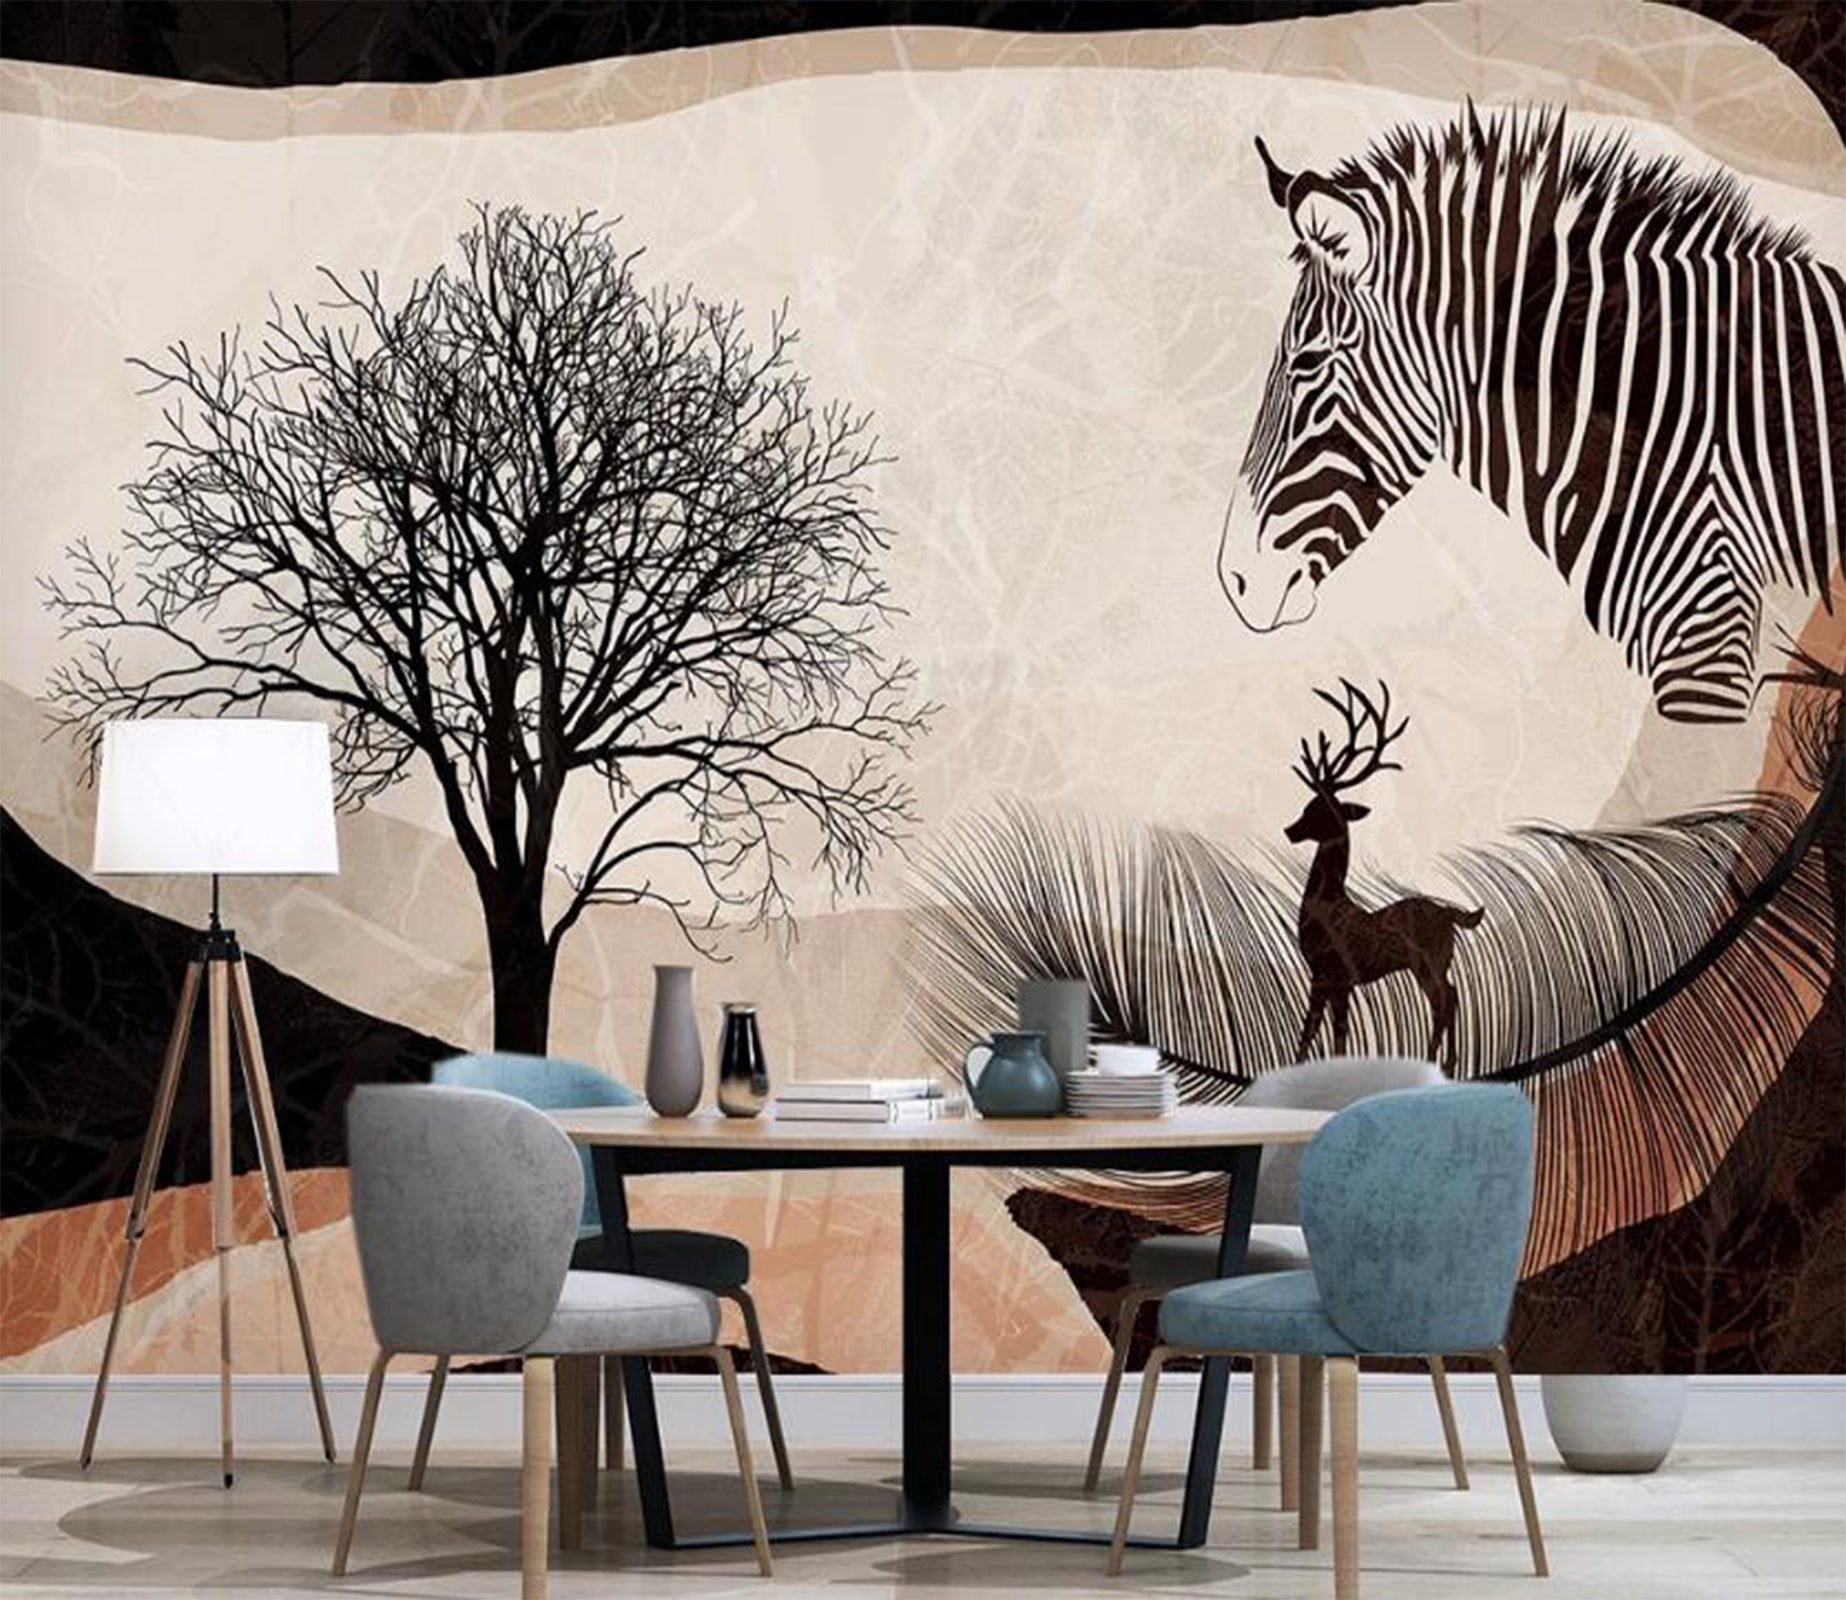 3D Everything About Black Loneliness 2580 Wall Murals